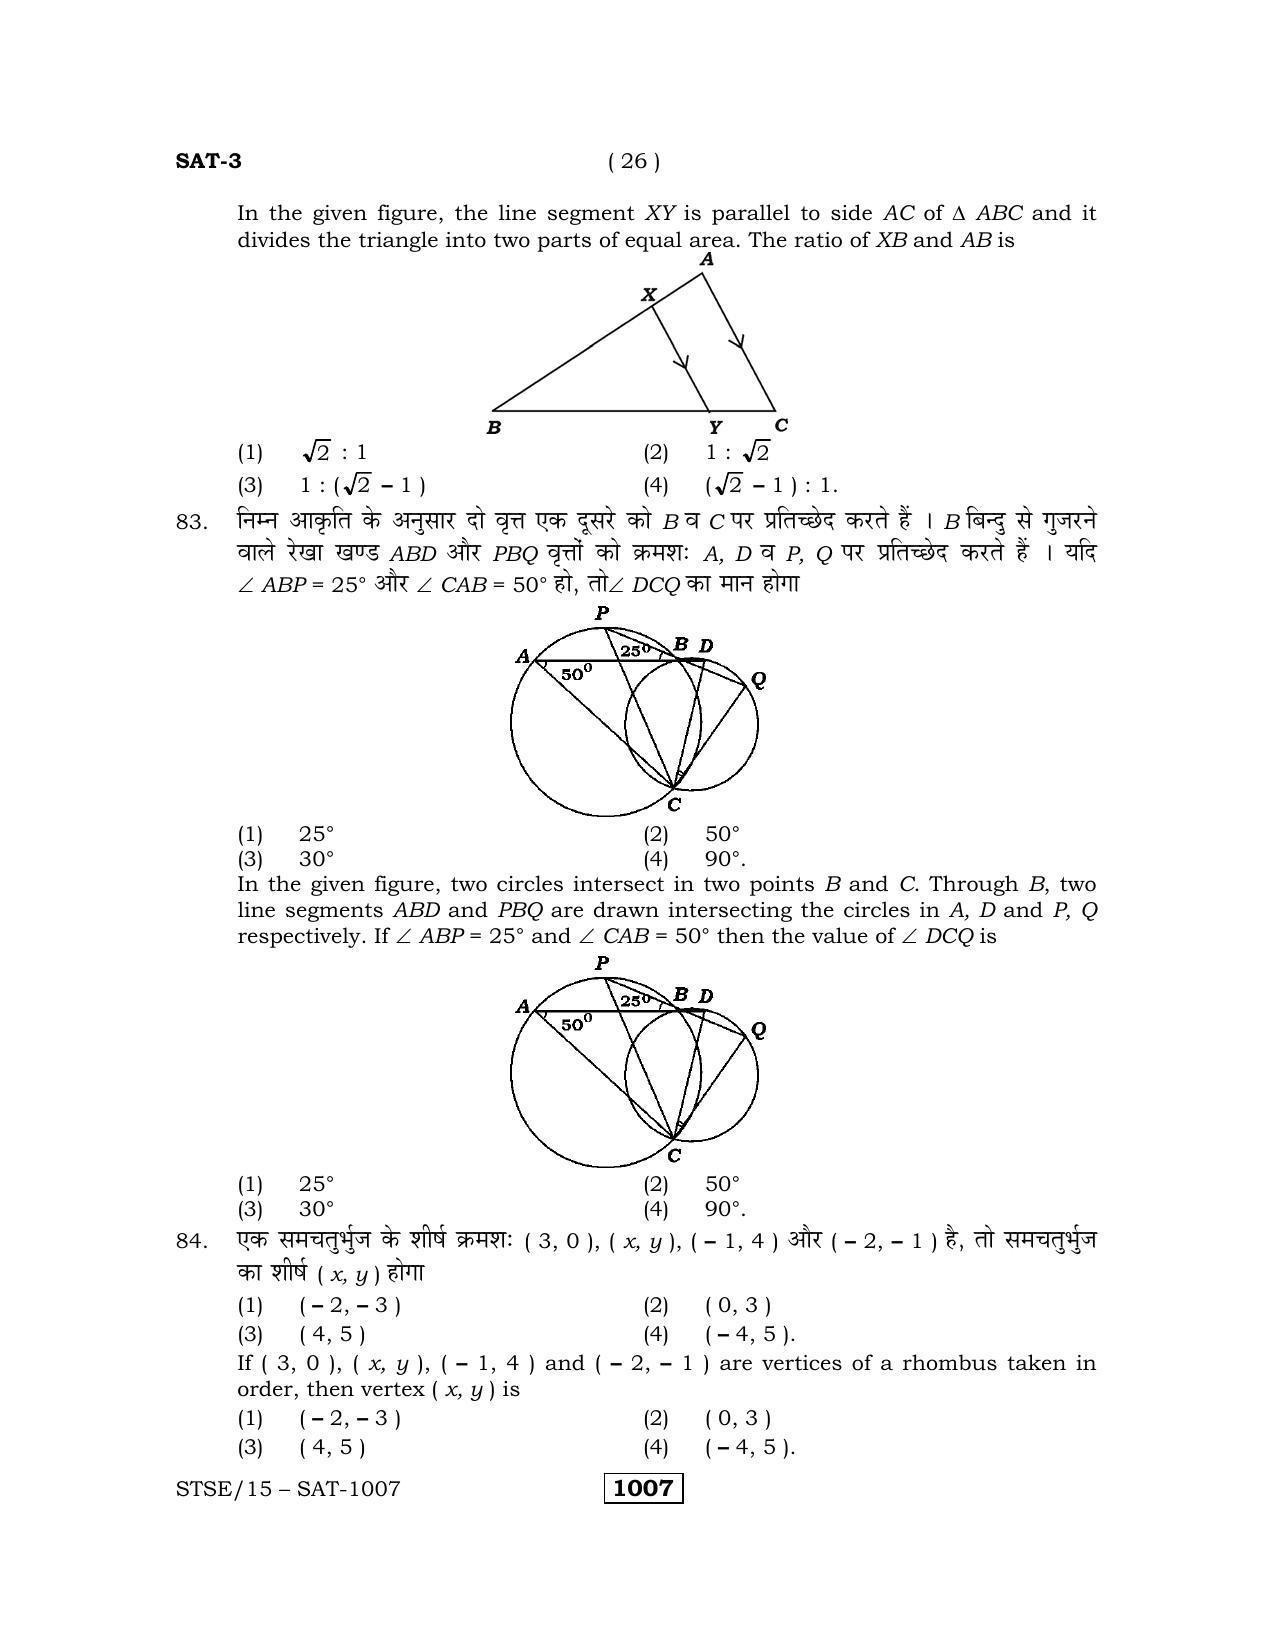 Rajasthan STSE Class 12 (Scholastic Aptitude Test) Question Paper 2015 - Page 26